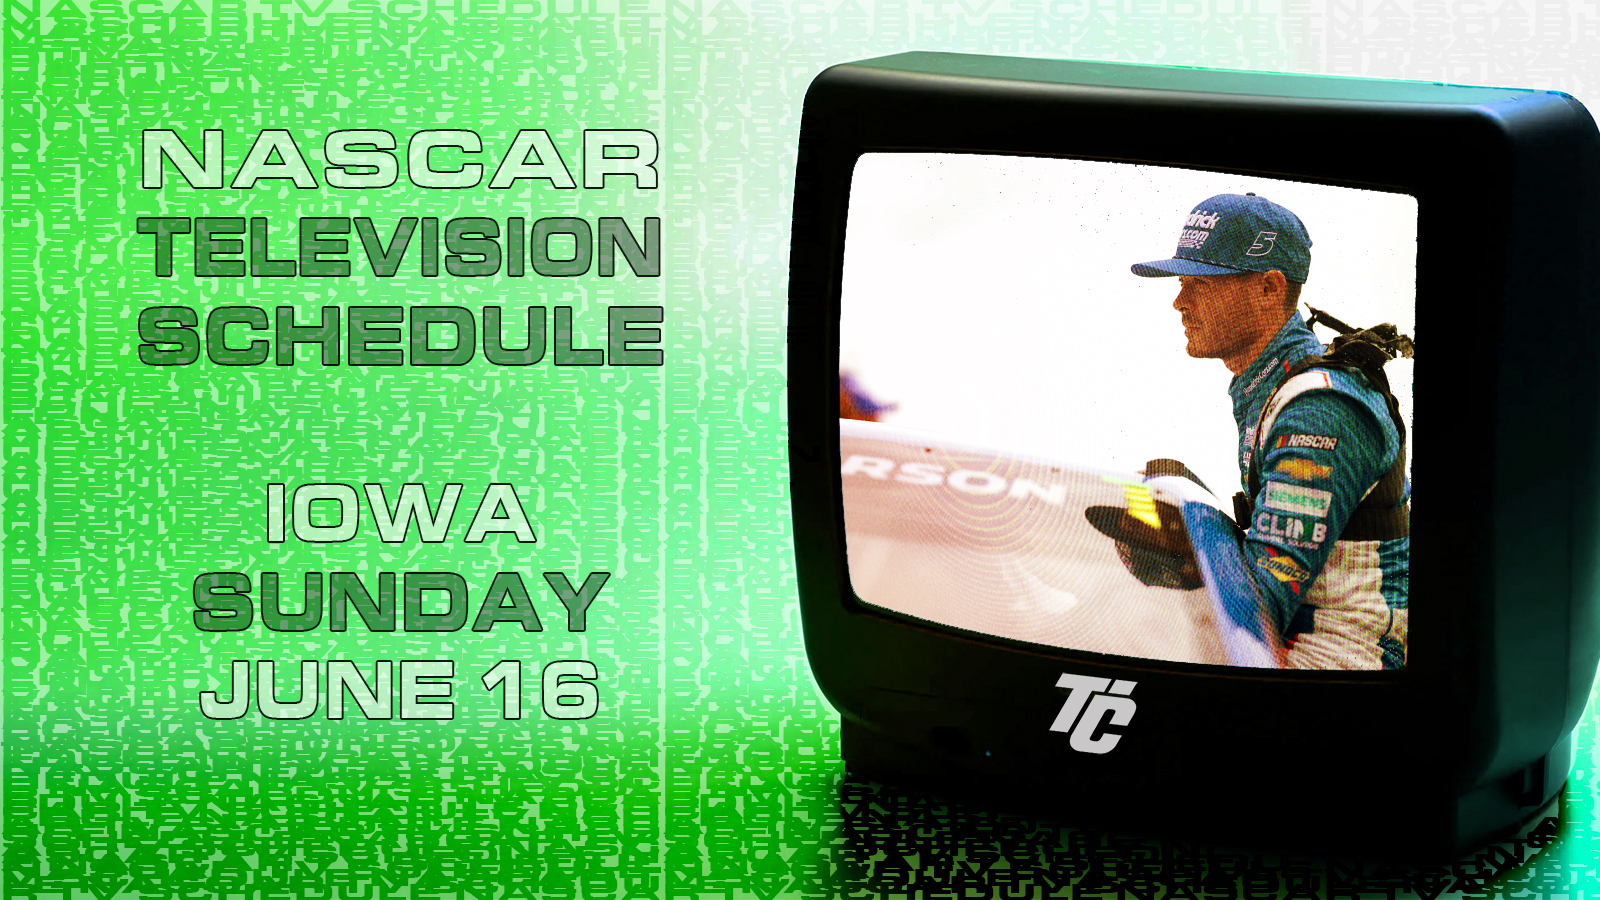 NASCAR TV Schedule Sunday June 16 Iowa Speedway How to watch the Iowa Corn 350 What channel is NASCAR on today? What time does NASCAR start